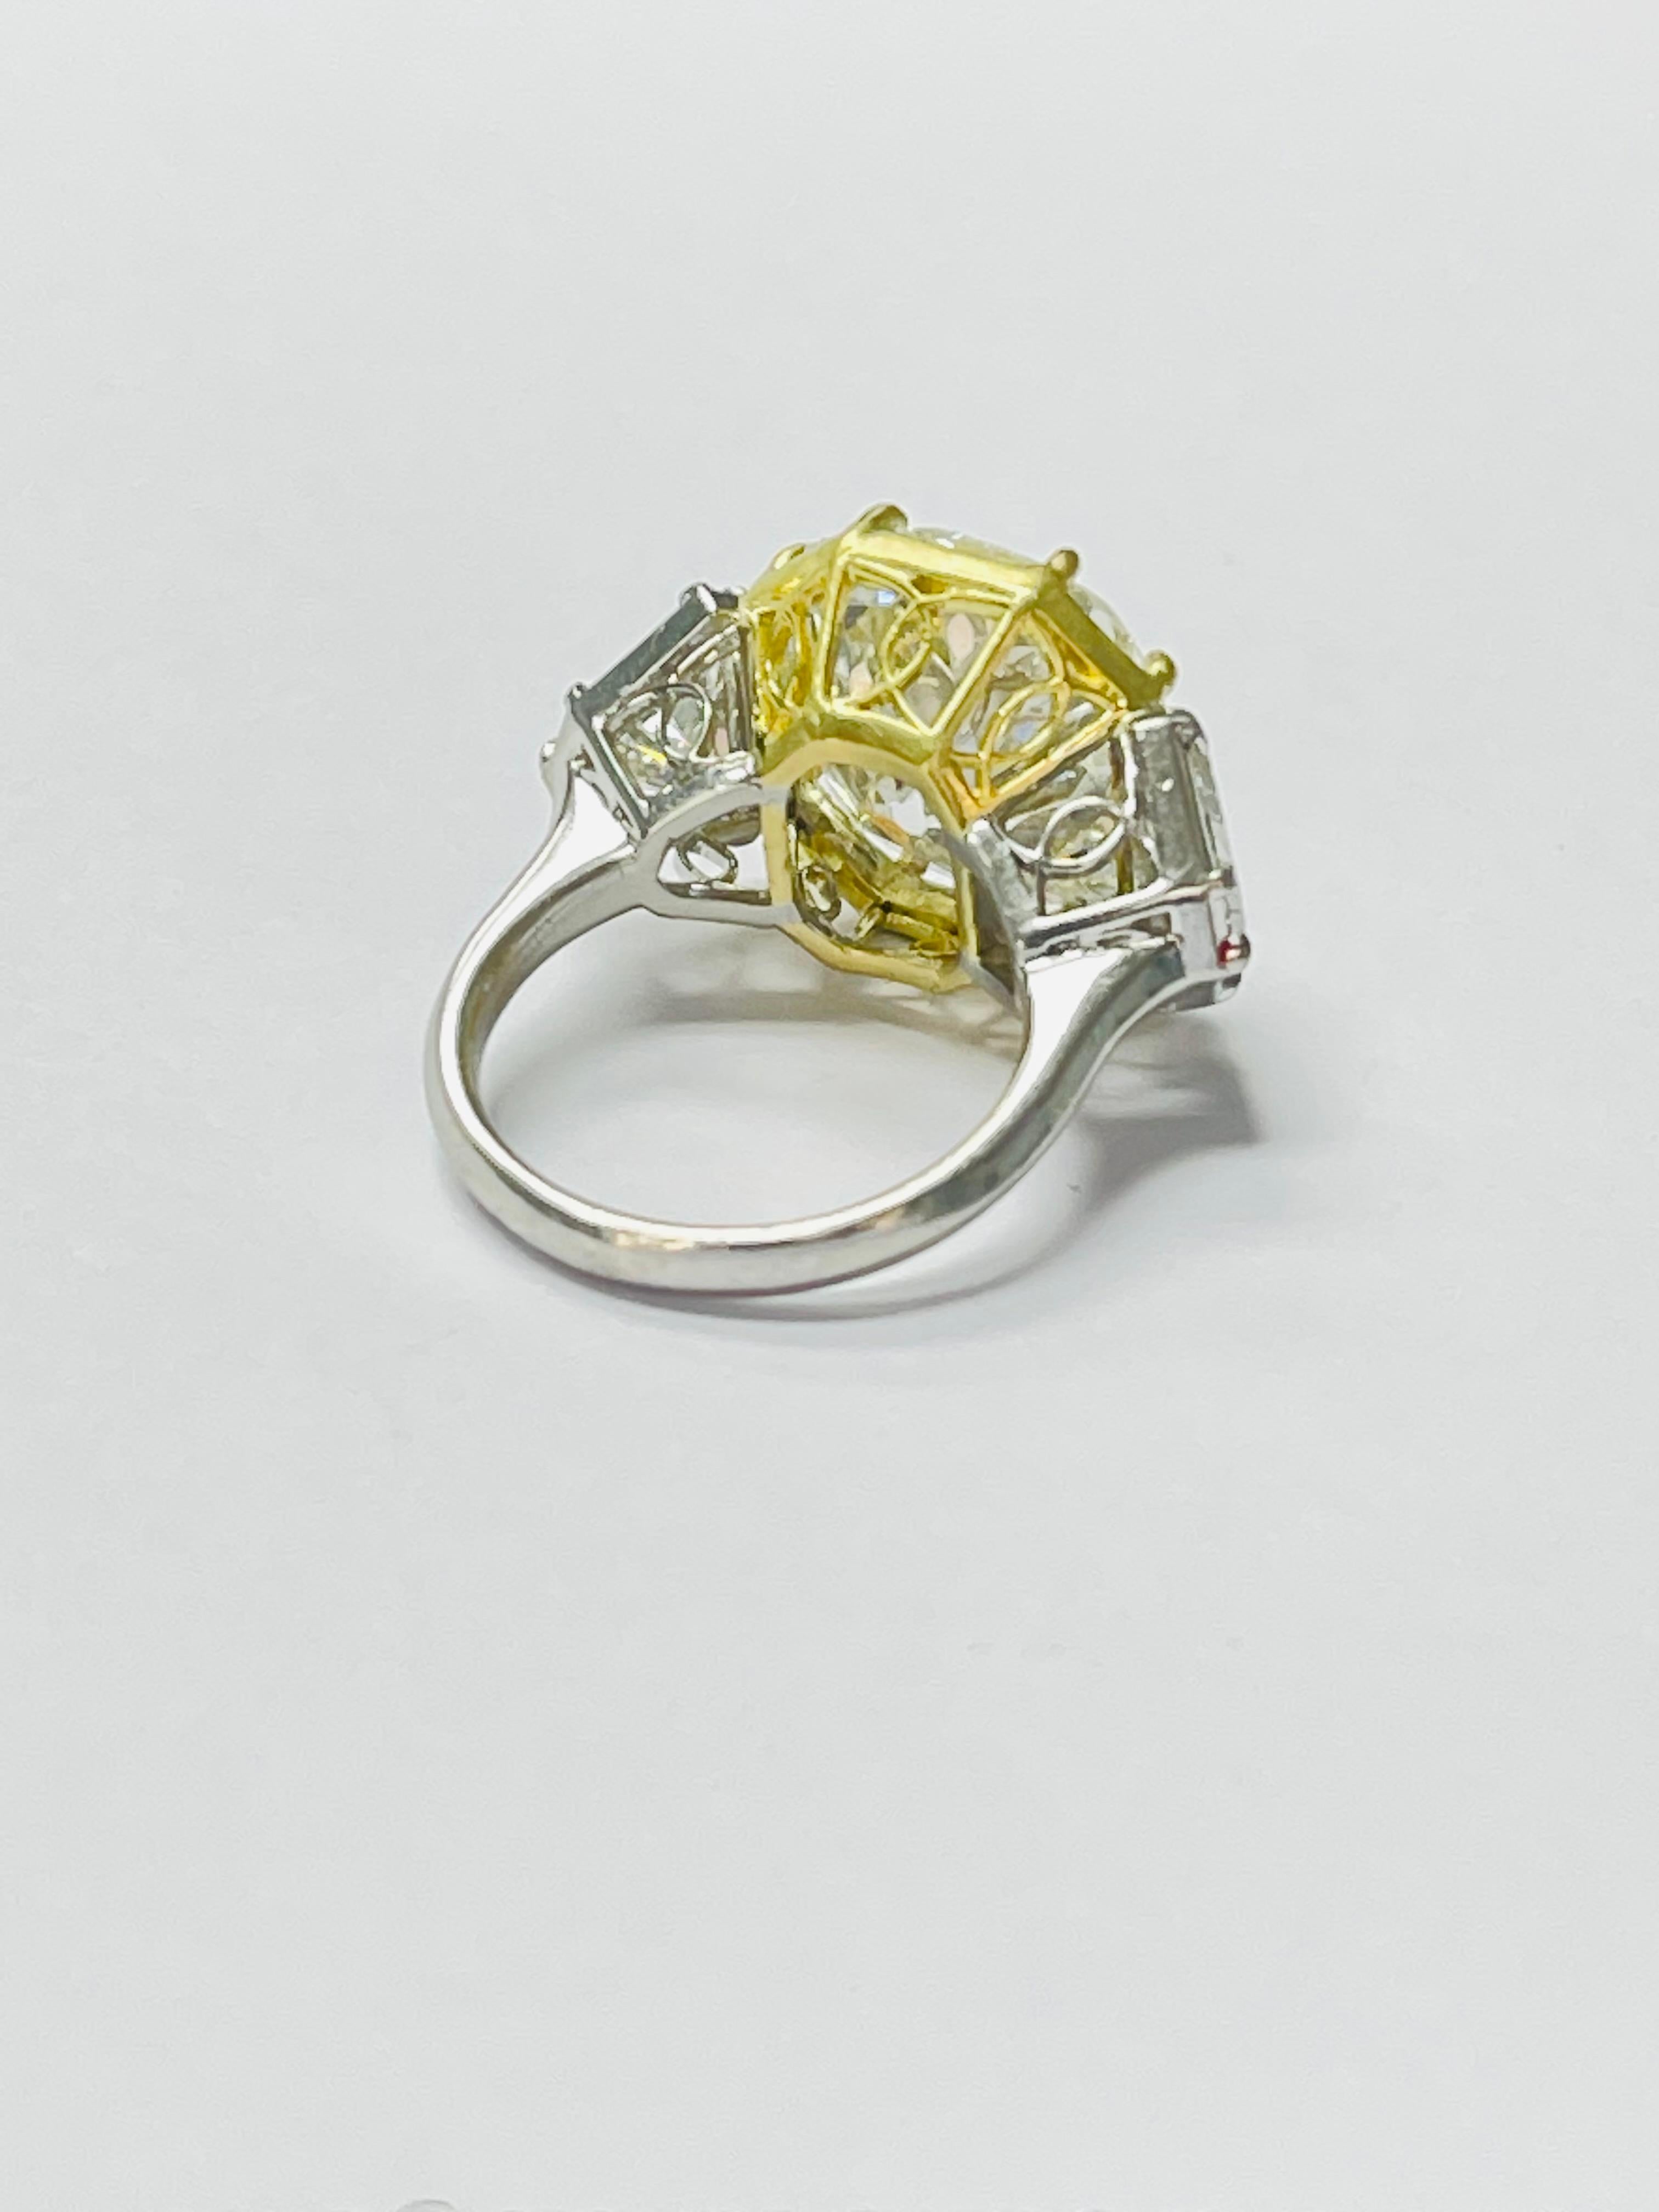 9.38 Carat Old Mine Cut Diamond Three Stone Ring in Yellow and White Gold 4